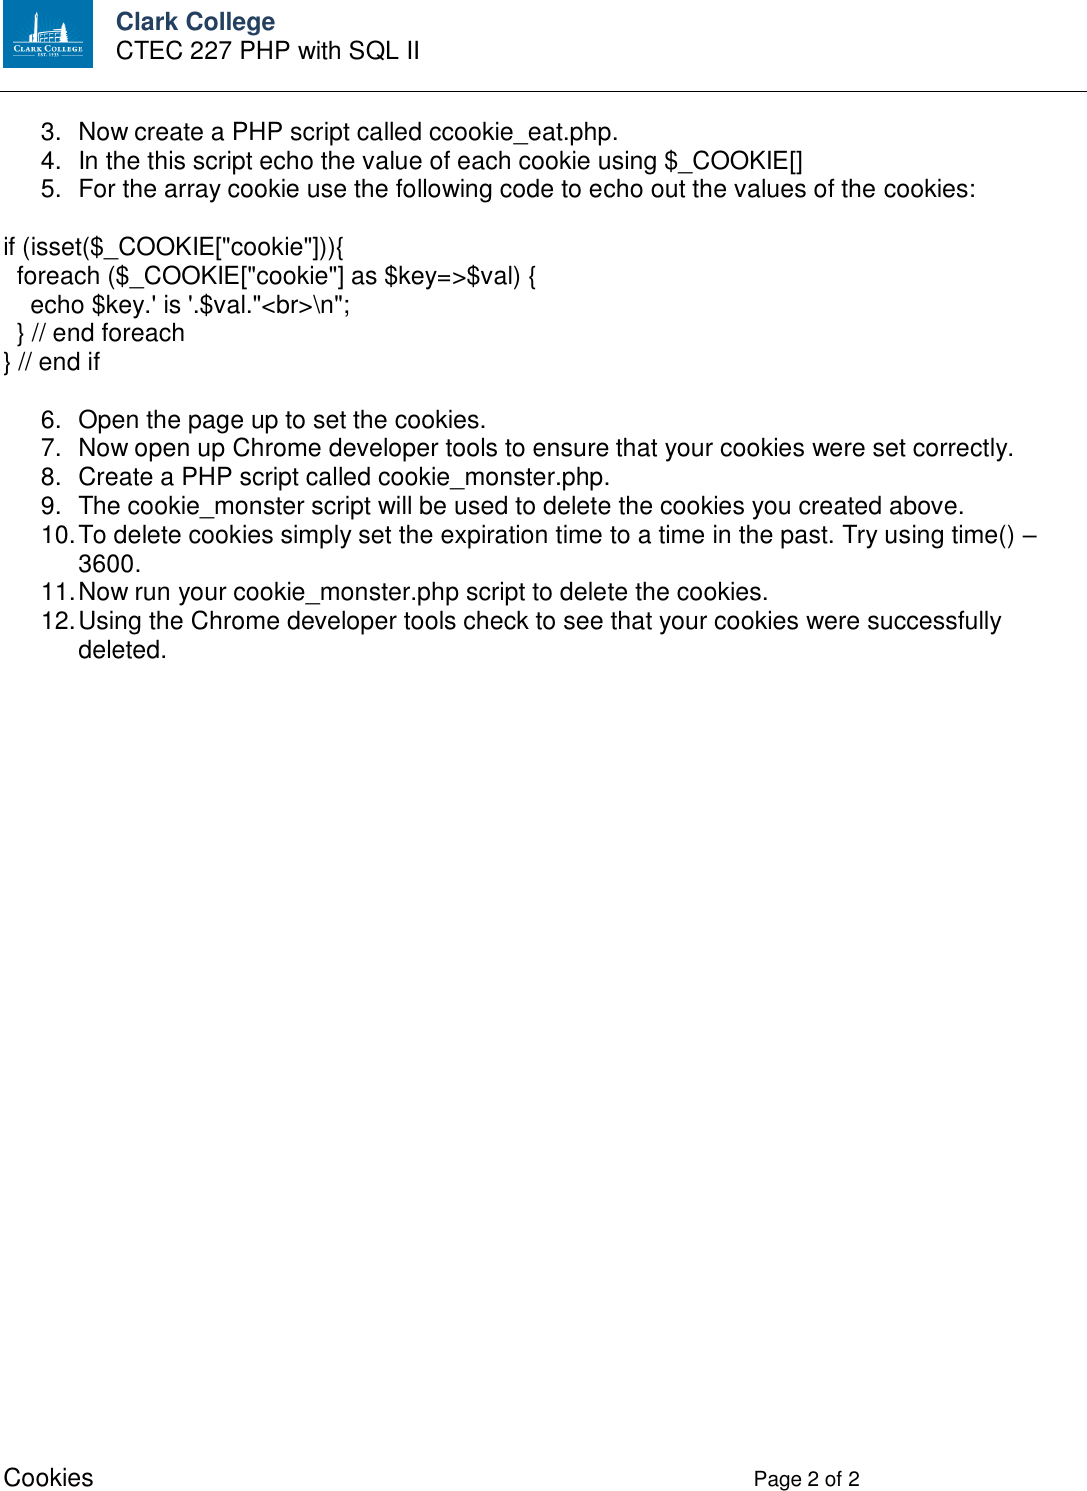 Page 2 of 2 - First Graded Assignment Ctec-227-lab-2-instructions